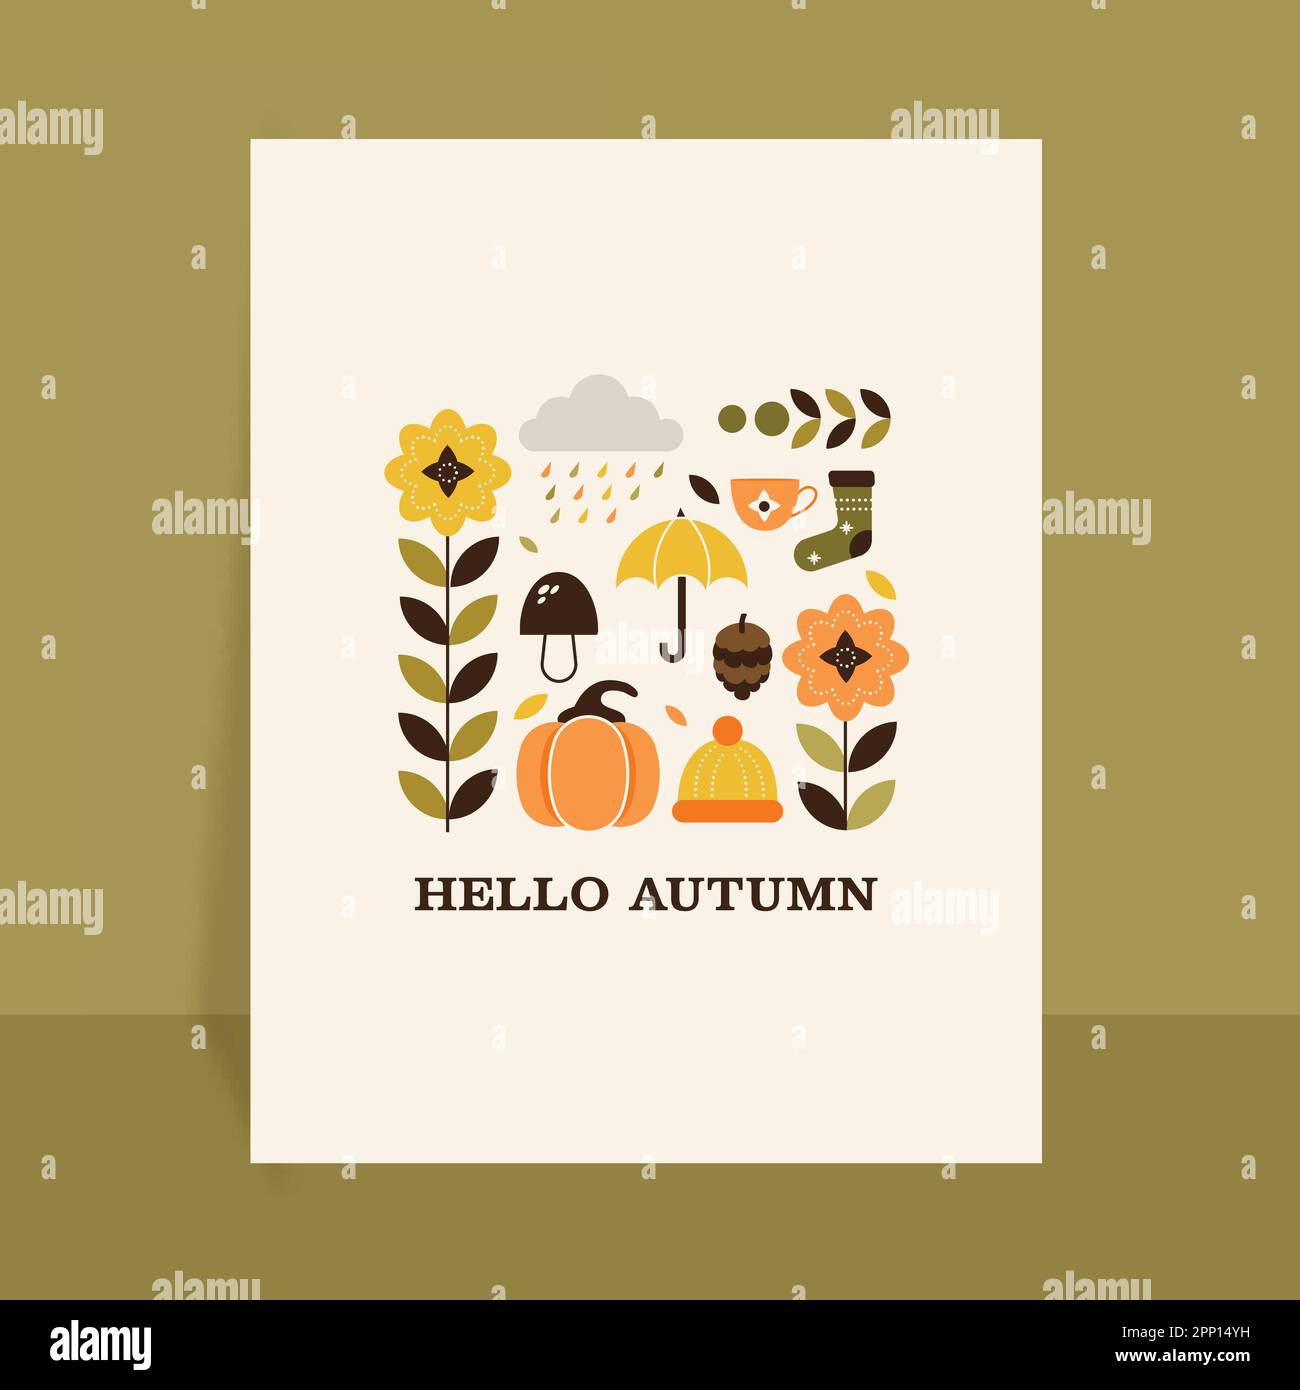 Hello Autumn Greeting Card With Season Elements On White Background. Stock Vector